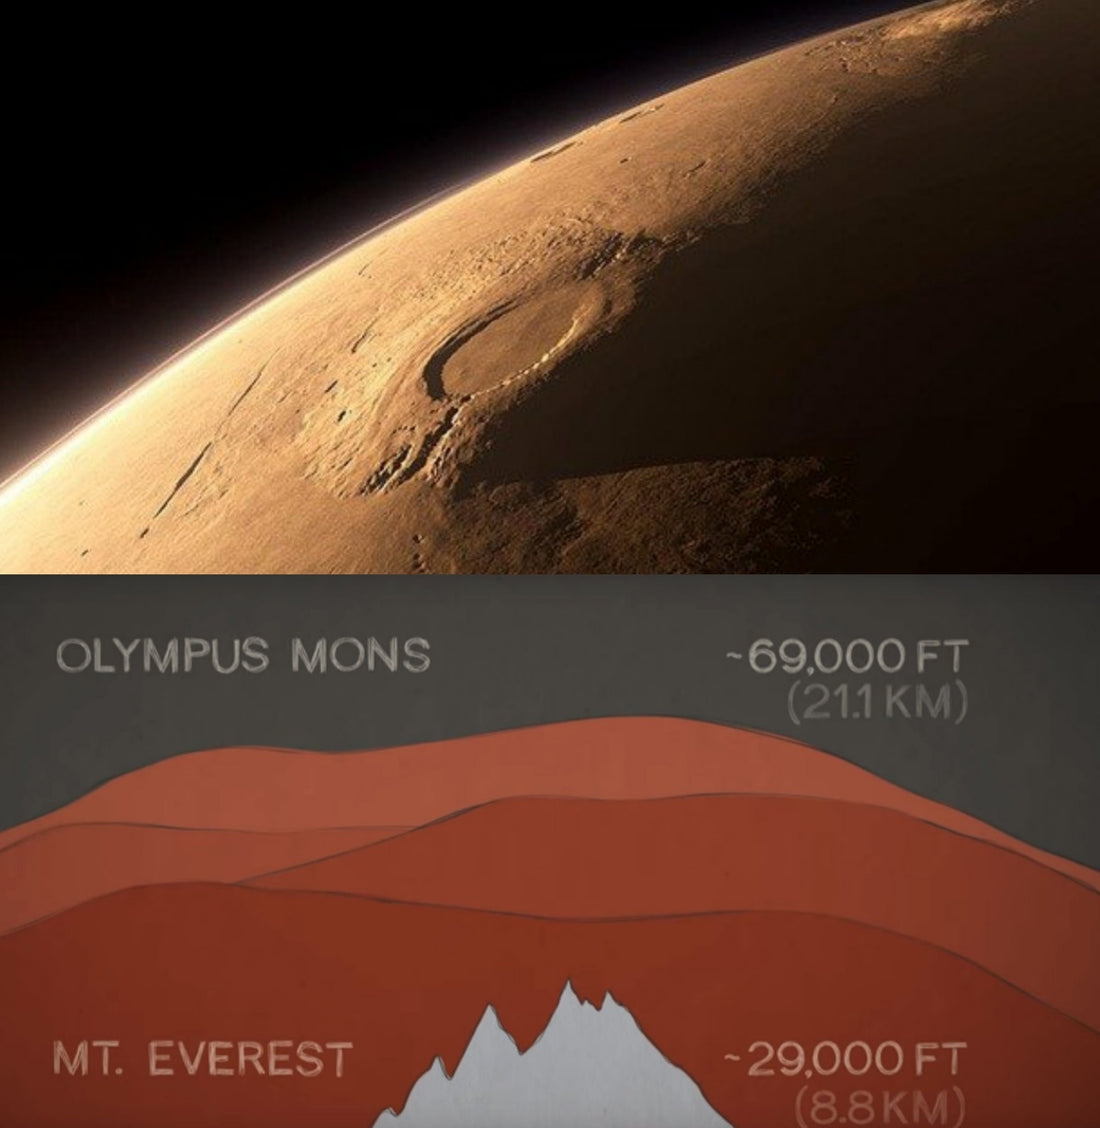 Why Aren't Earth Mountains Bigger Like Mars?